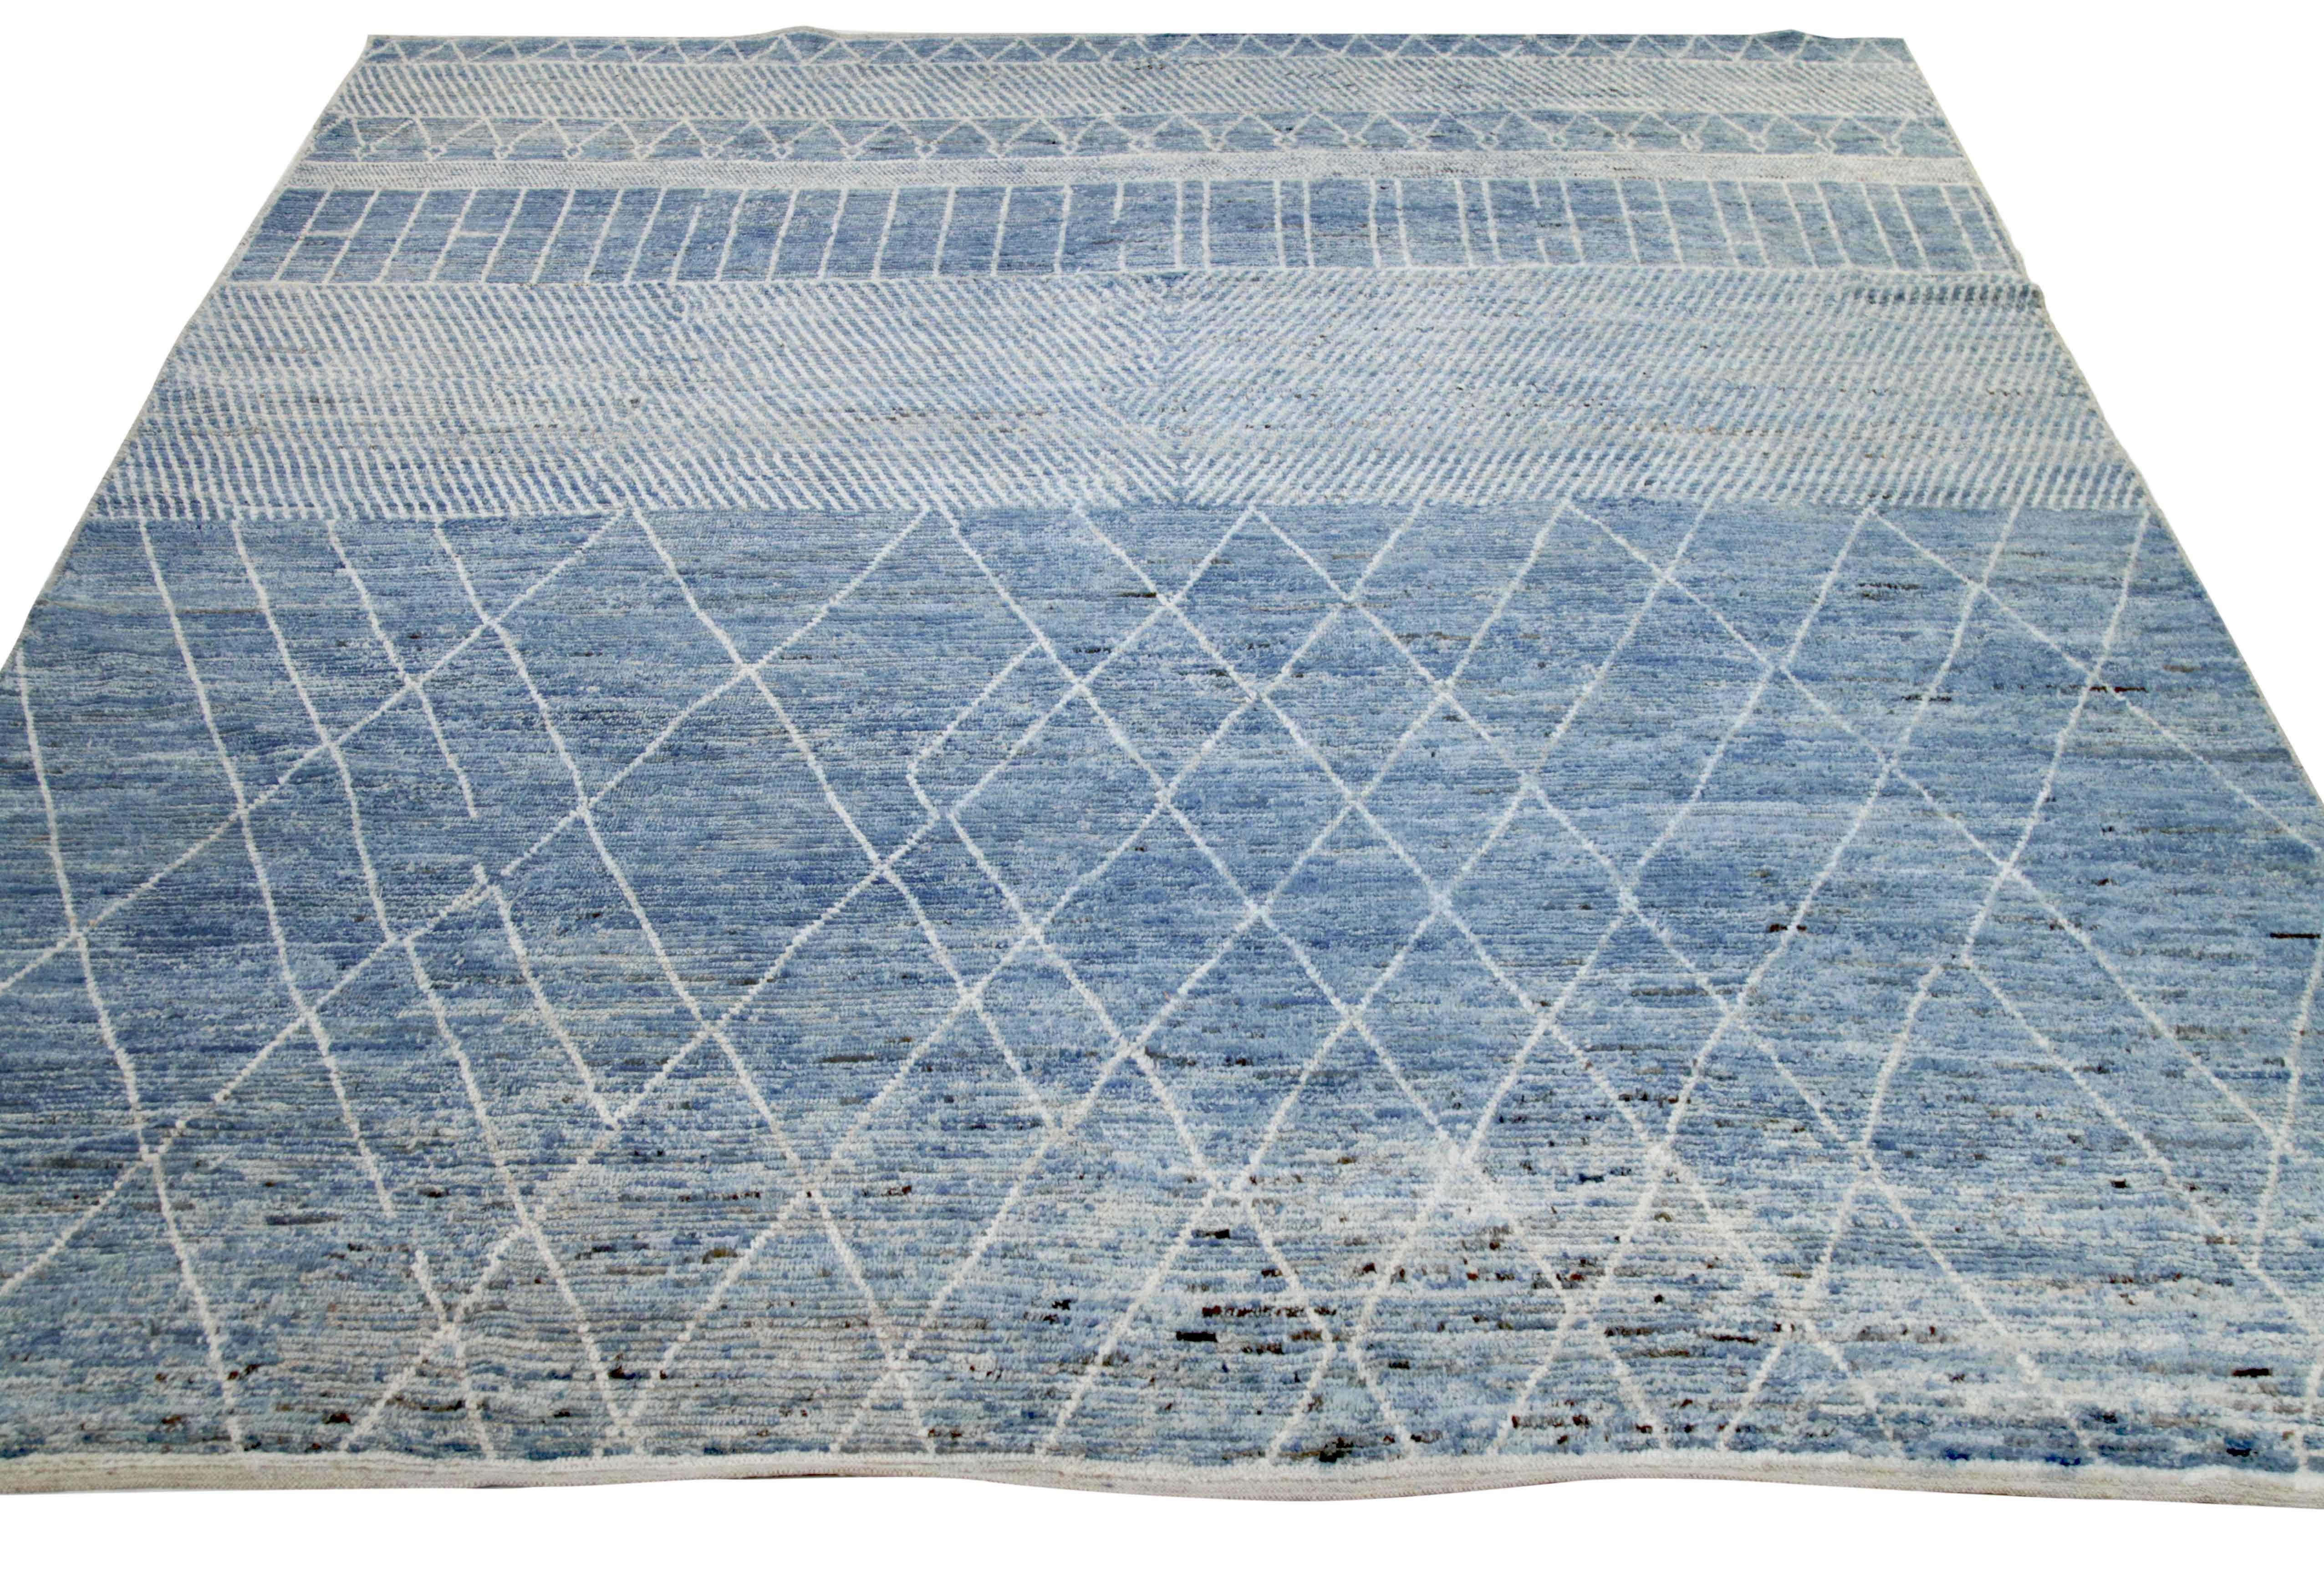 Modern Afghan rug handwoven from the finest sheep’s wool. It’s colored with all-natural vegetable dyes that are safe for humans and pets. This piece is a traditional Afghan weaving featuring a Moroccan inspired design. It’s highlighted by white